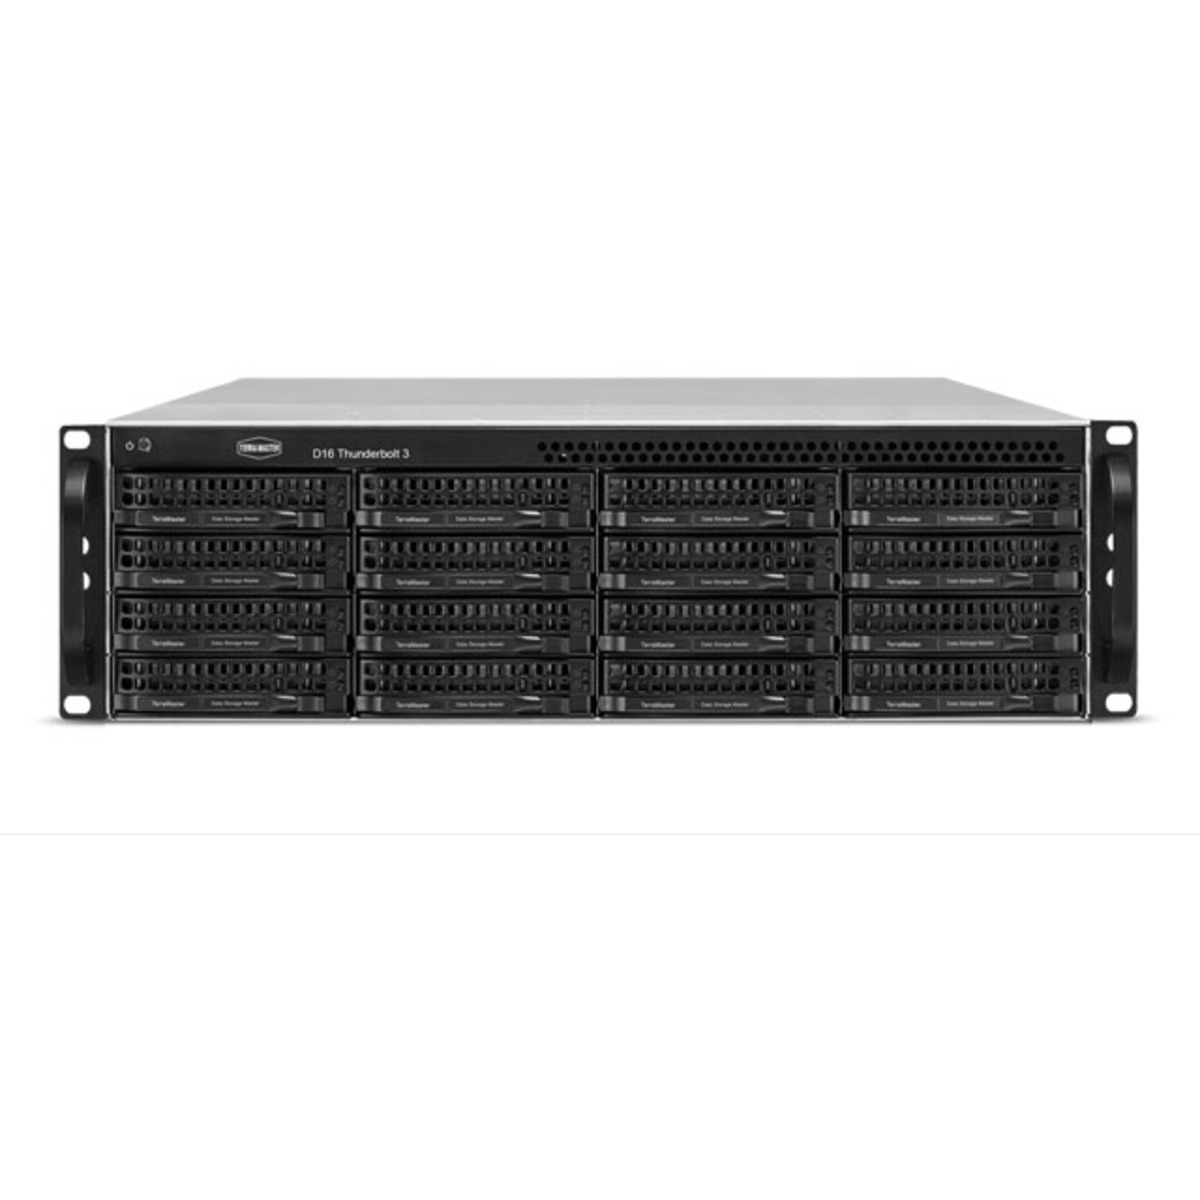 TerraMaster D16 Thunderbolt 3 220tb 16-Bay RackMount Multimedia / Power User / Business DAS - Direct Attached Storage Device 10x22tb Seagate EXOS X22 ST22000NM001E 3.5 7200rpm SATA 6Gb/s HDD ENTERPRISE Class Drives Installed - Burn-In Tested D16 Thunderbolt 3